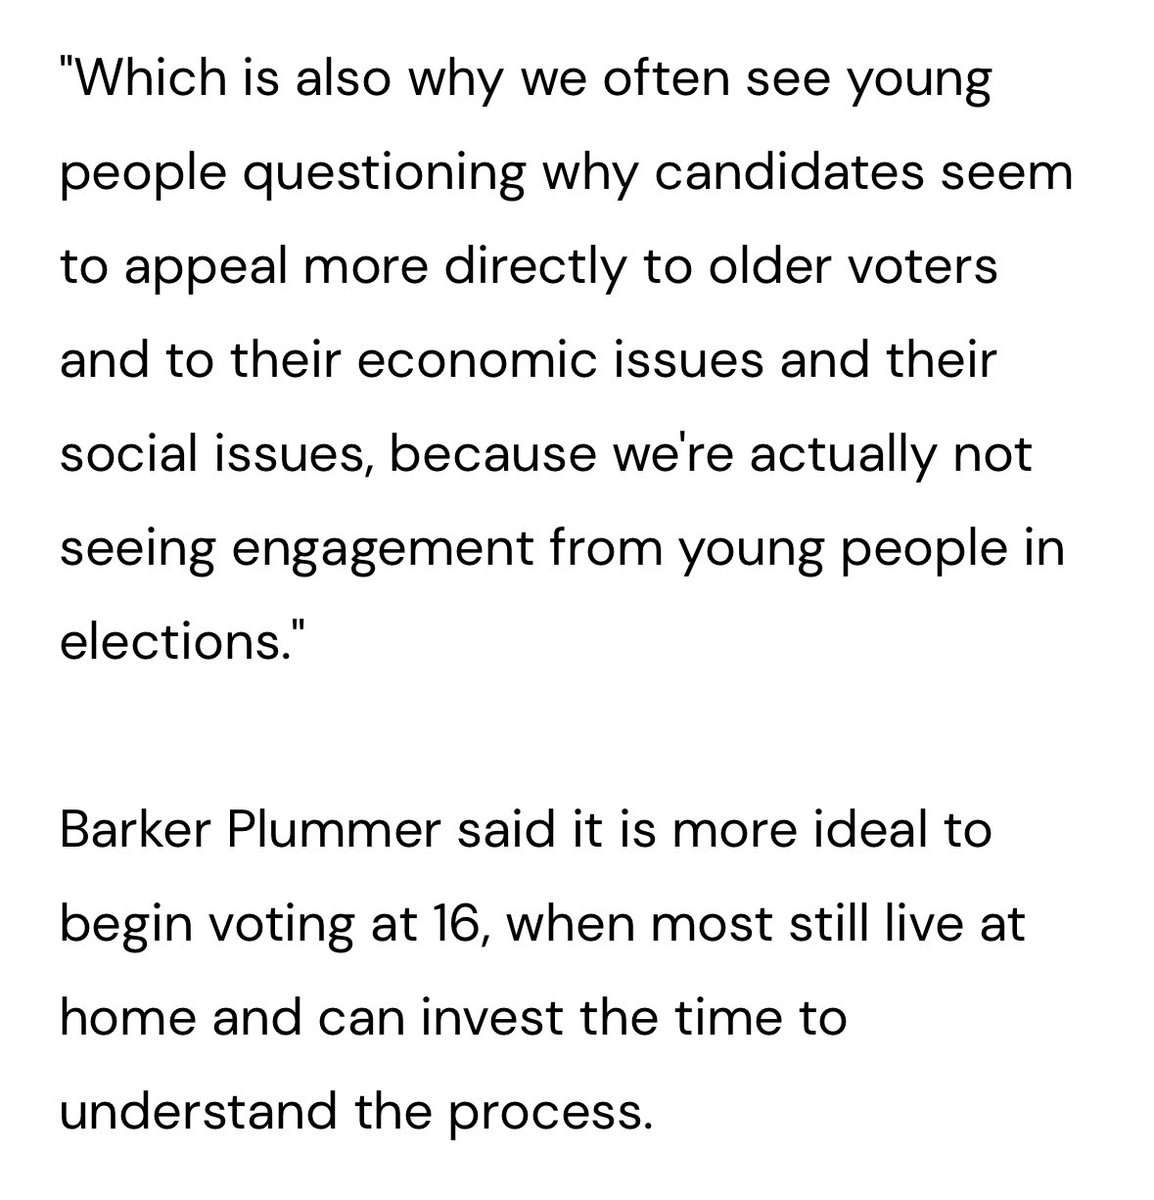 Thank you @SFGate for covering our work to expand the voting age in San Francisco! This is a common-sense proposal to strengthen our democracy and engage the next generation in their civic responsibility.